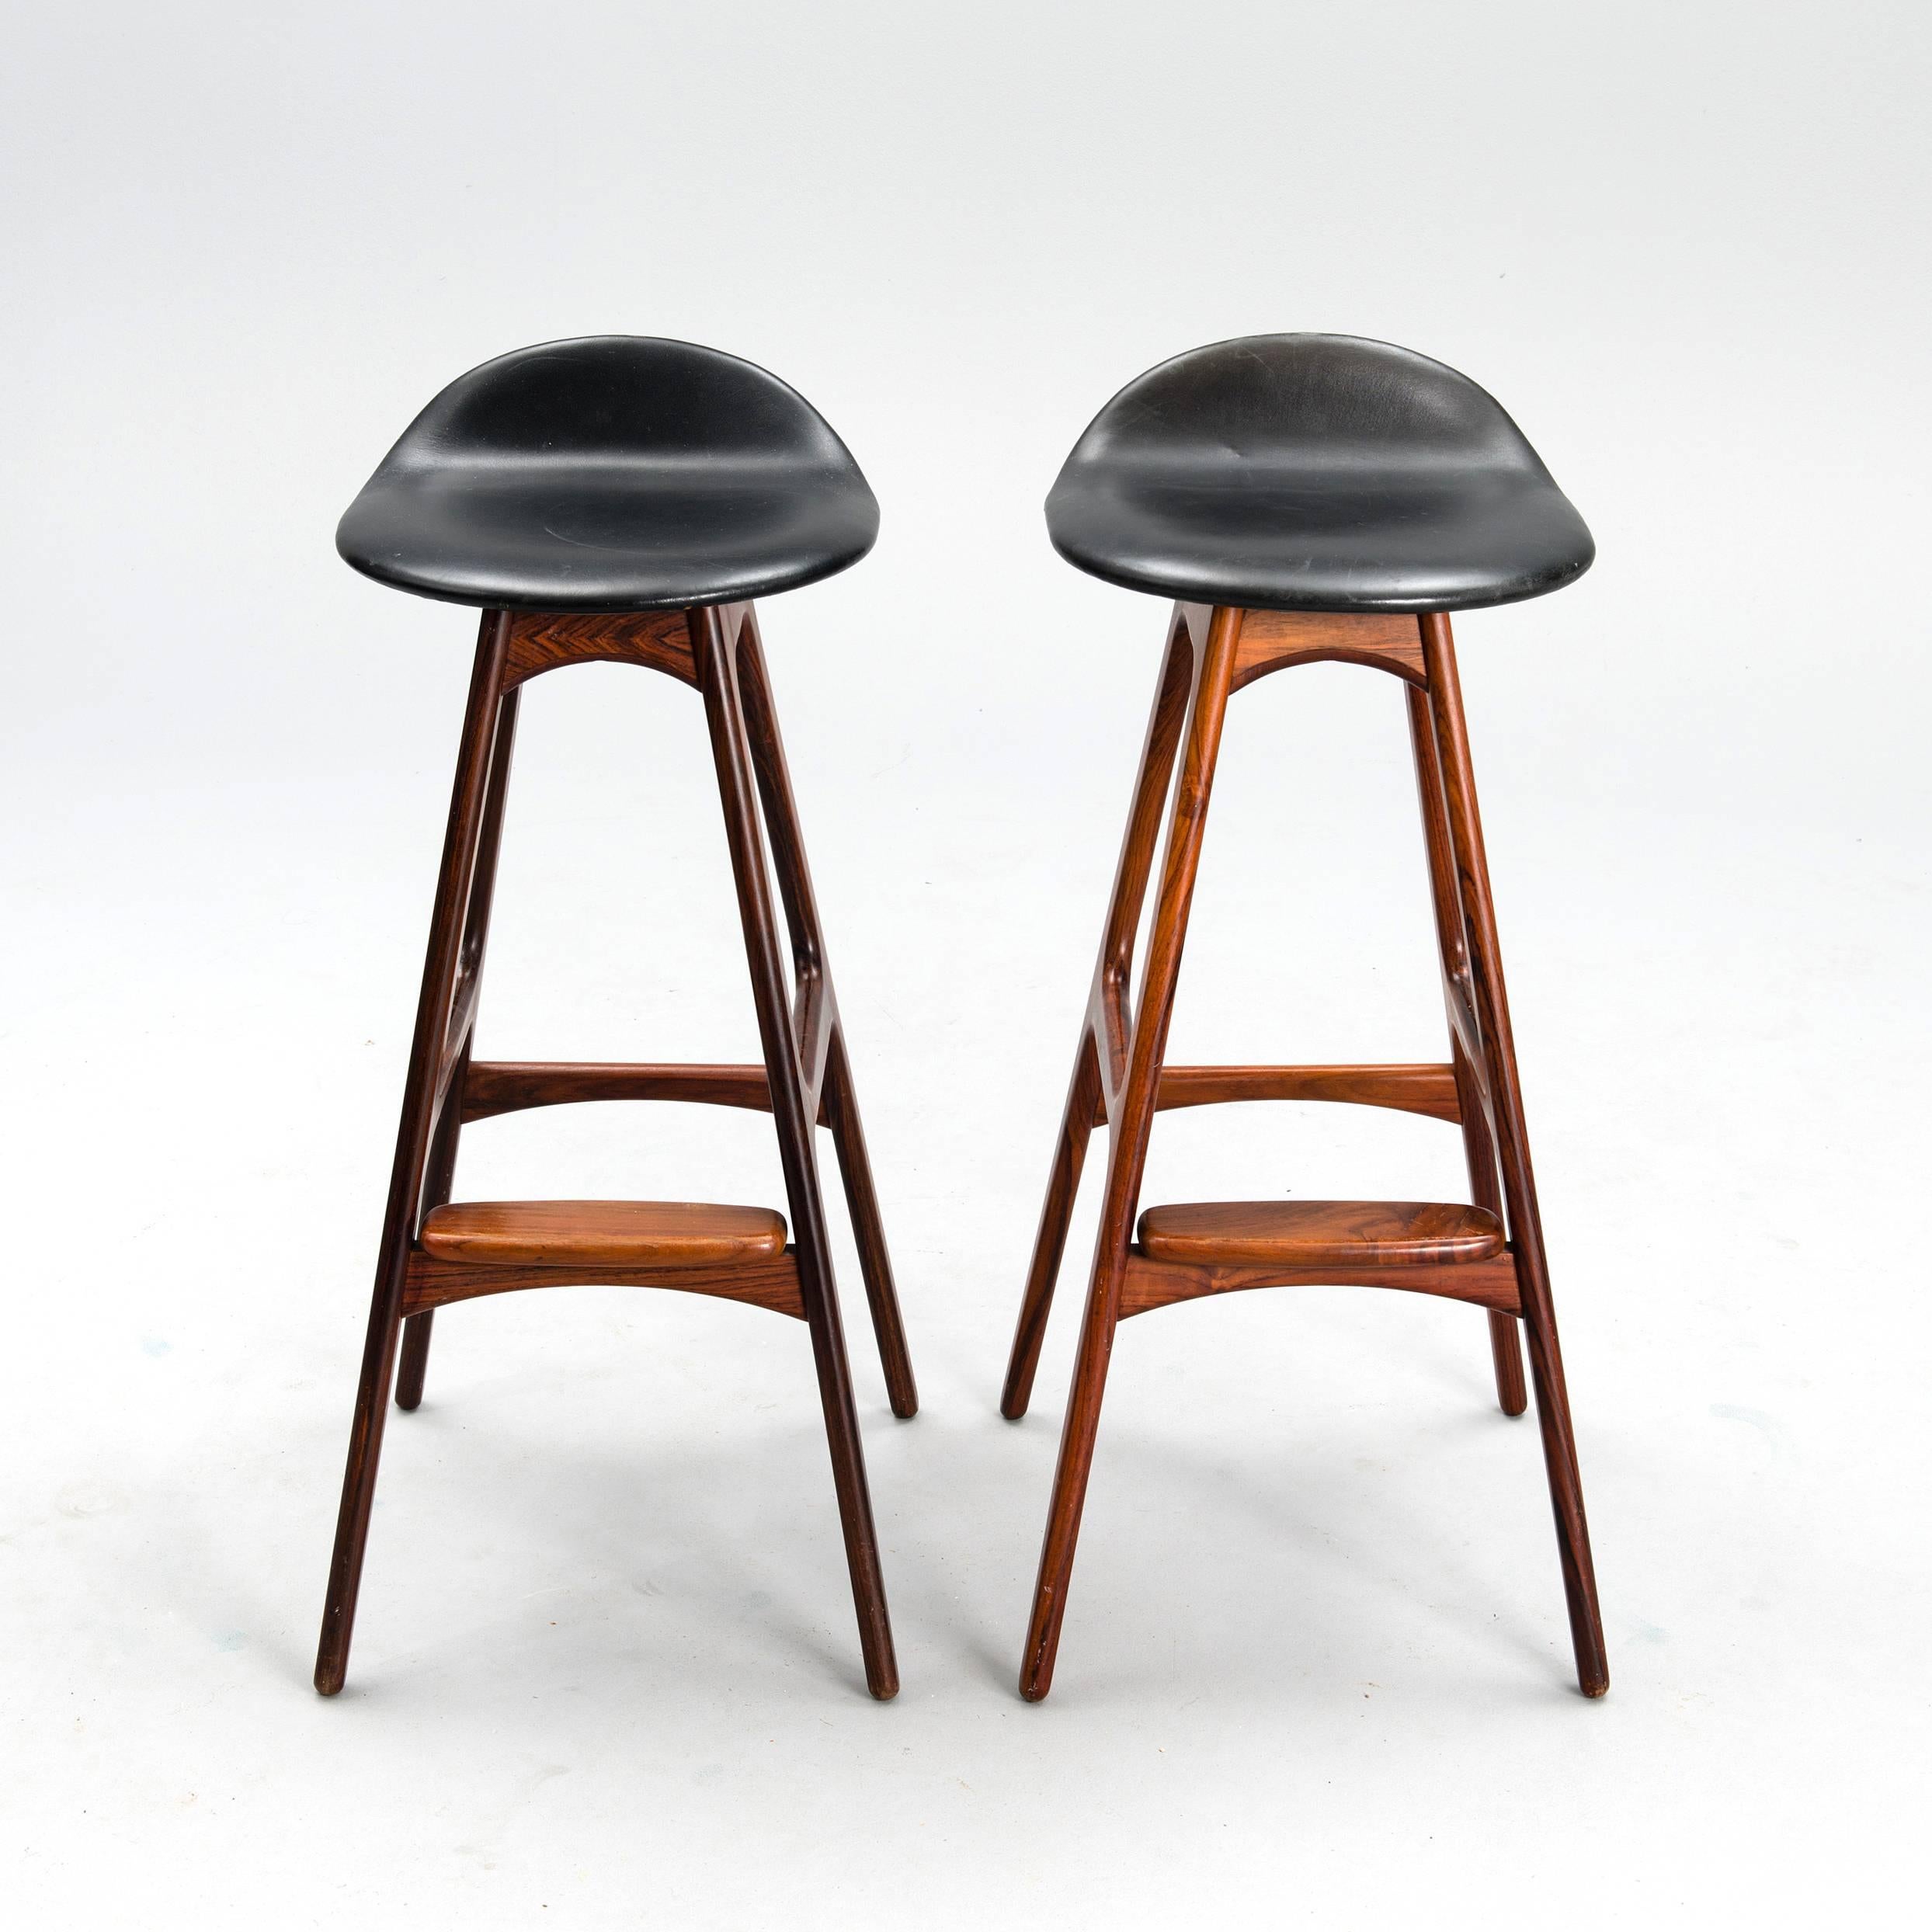 Original set of two rosewood and leather tall stools model OD61, designed by Erik Buck and manufactured by Oddense Maskinsnedkeri A-S Denmark in 1960. Labelled in the bottom.